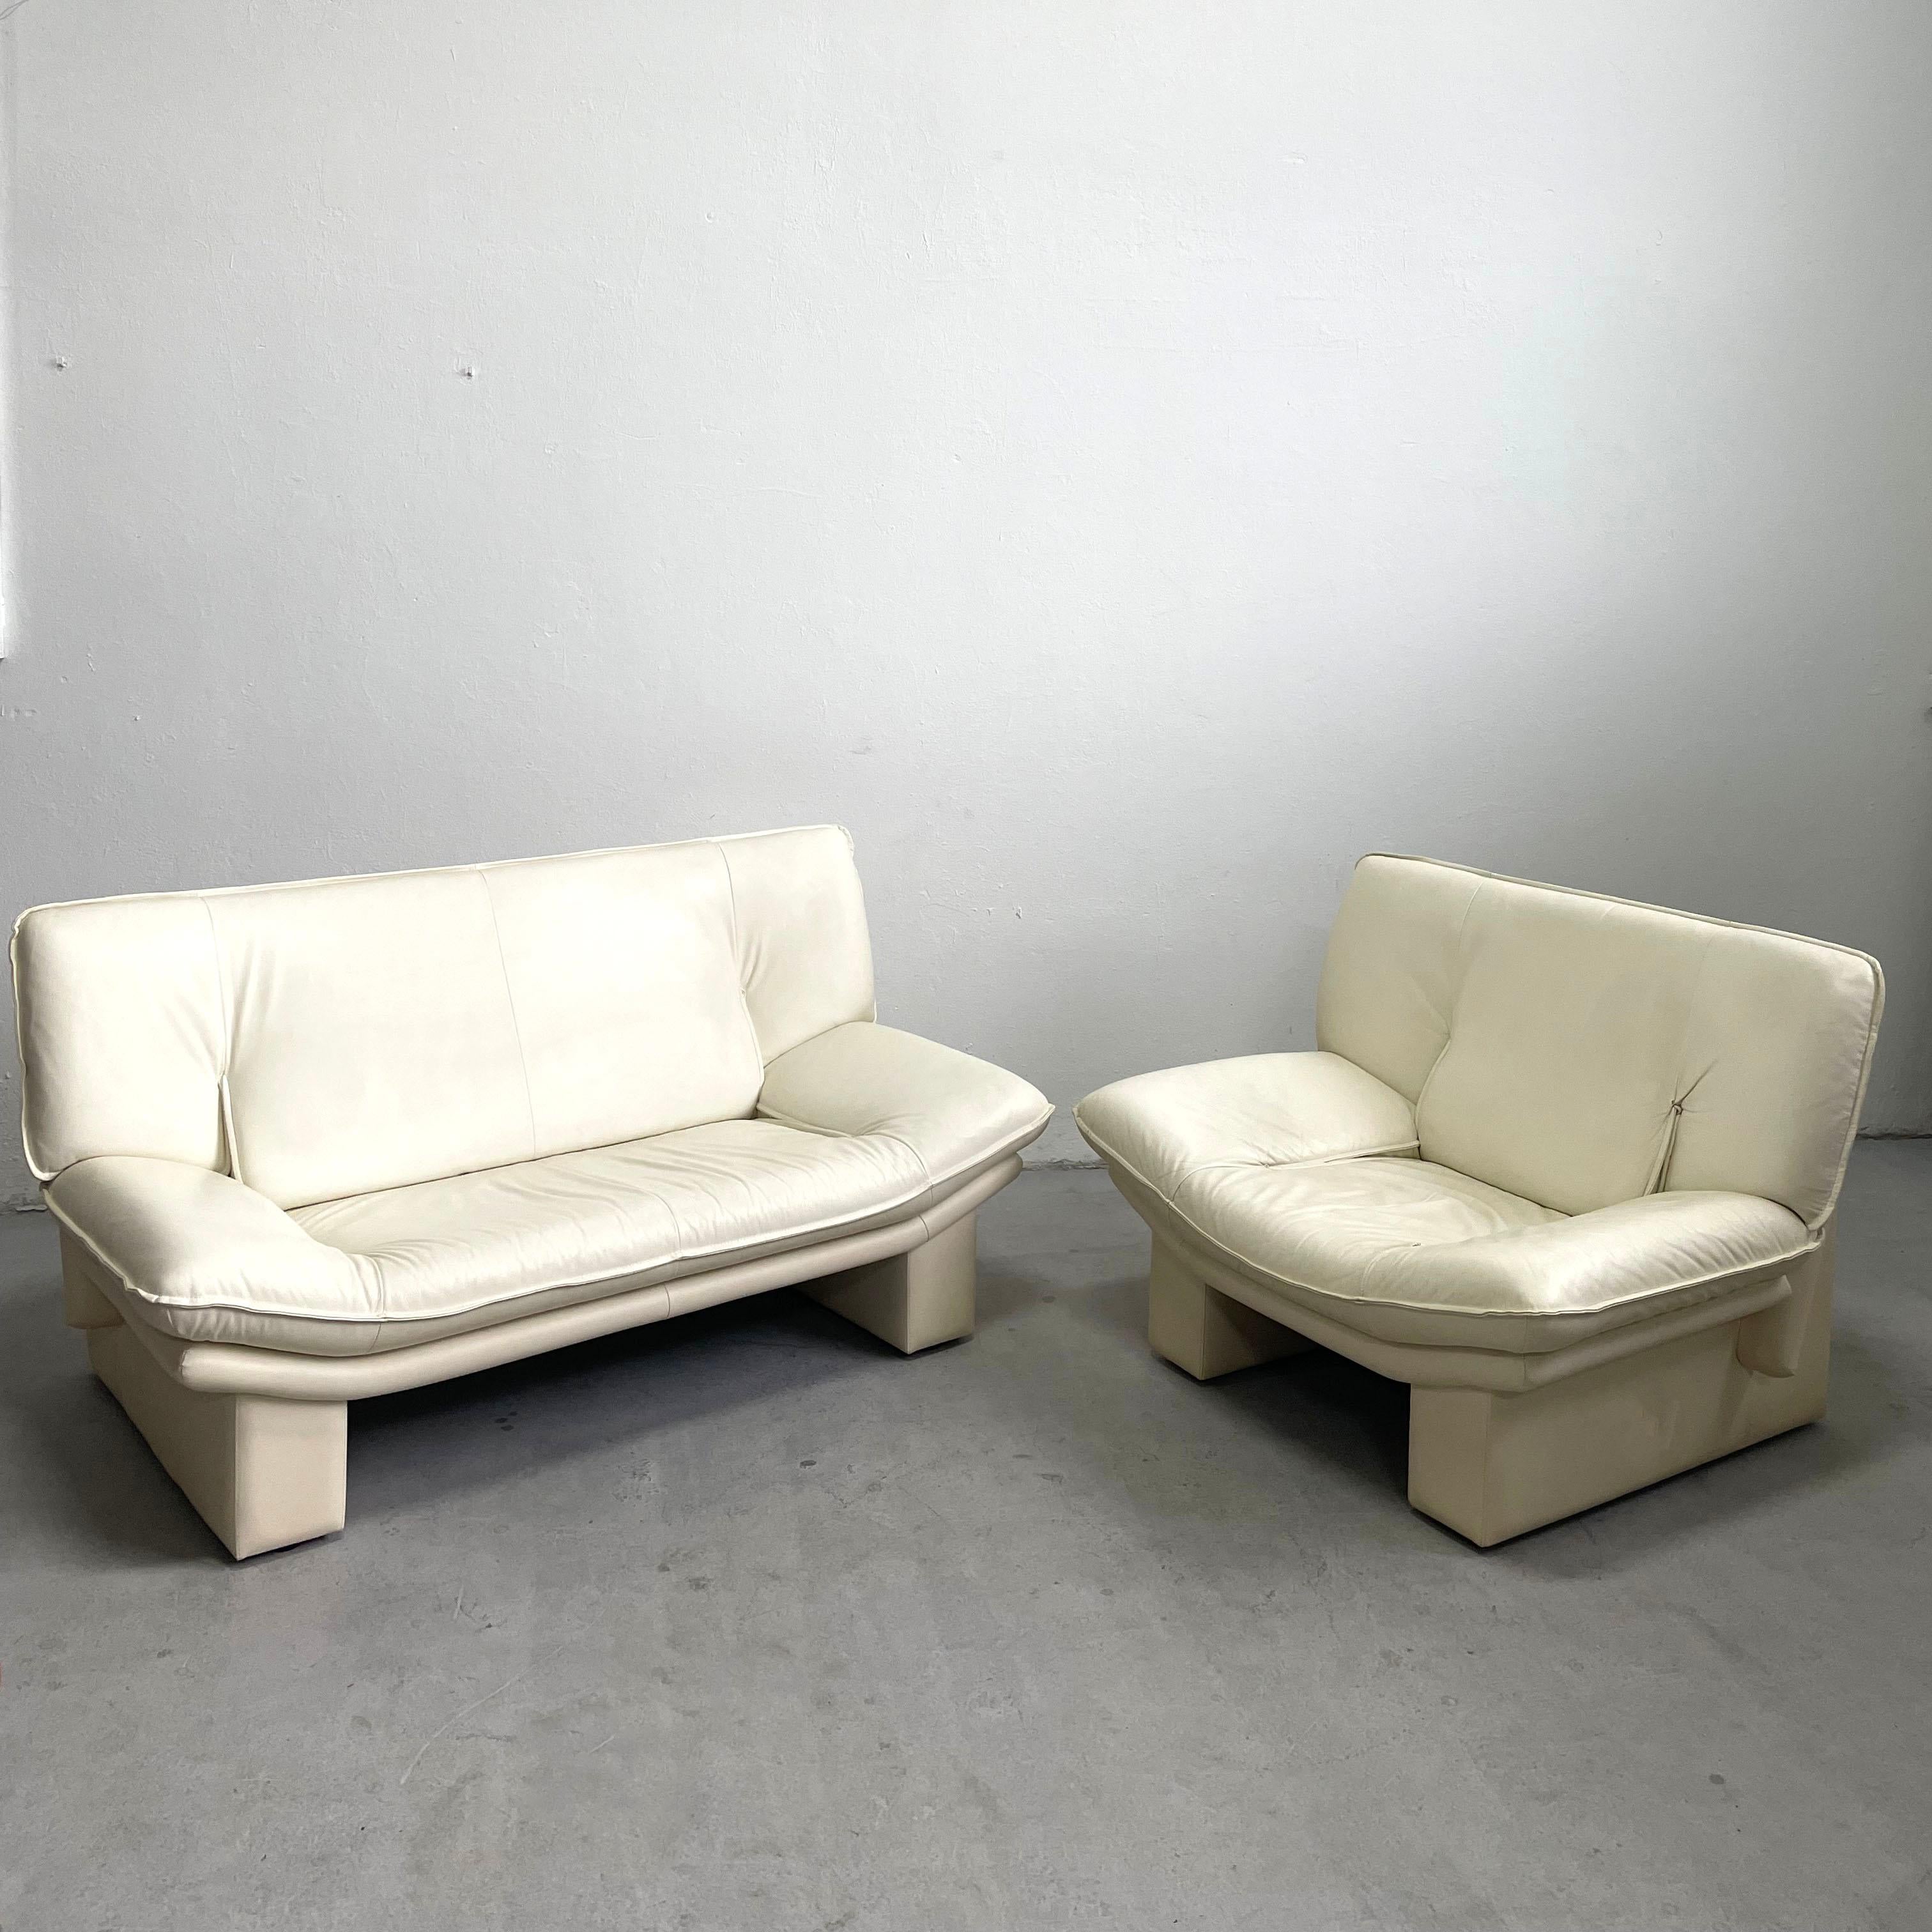 2-seater Italian sofa in beautiful ivory white color from the 1980s

This sofa features wooden frame and very soft leather/leatherette upholstery

The sofa remains in a very good vintage condition, showing just minor traces of cosmetic wear

It's